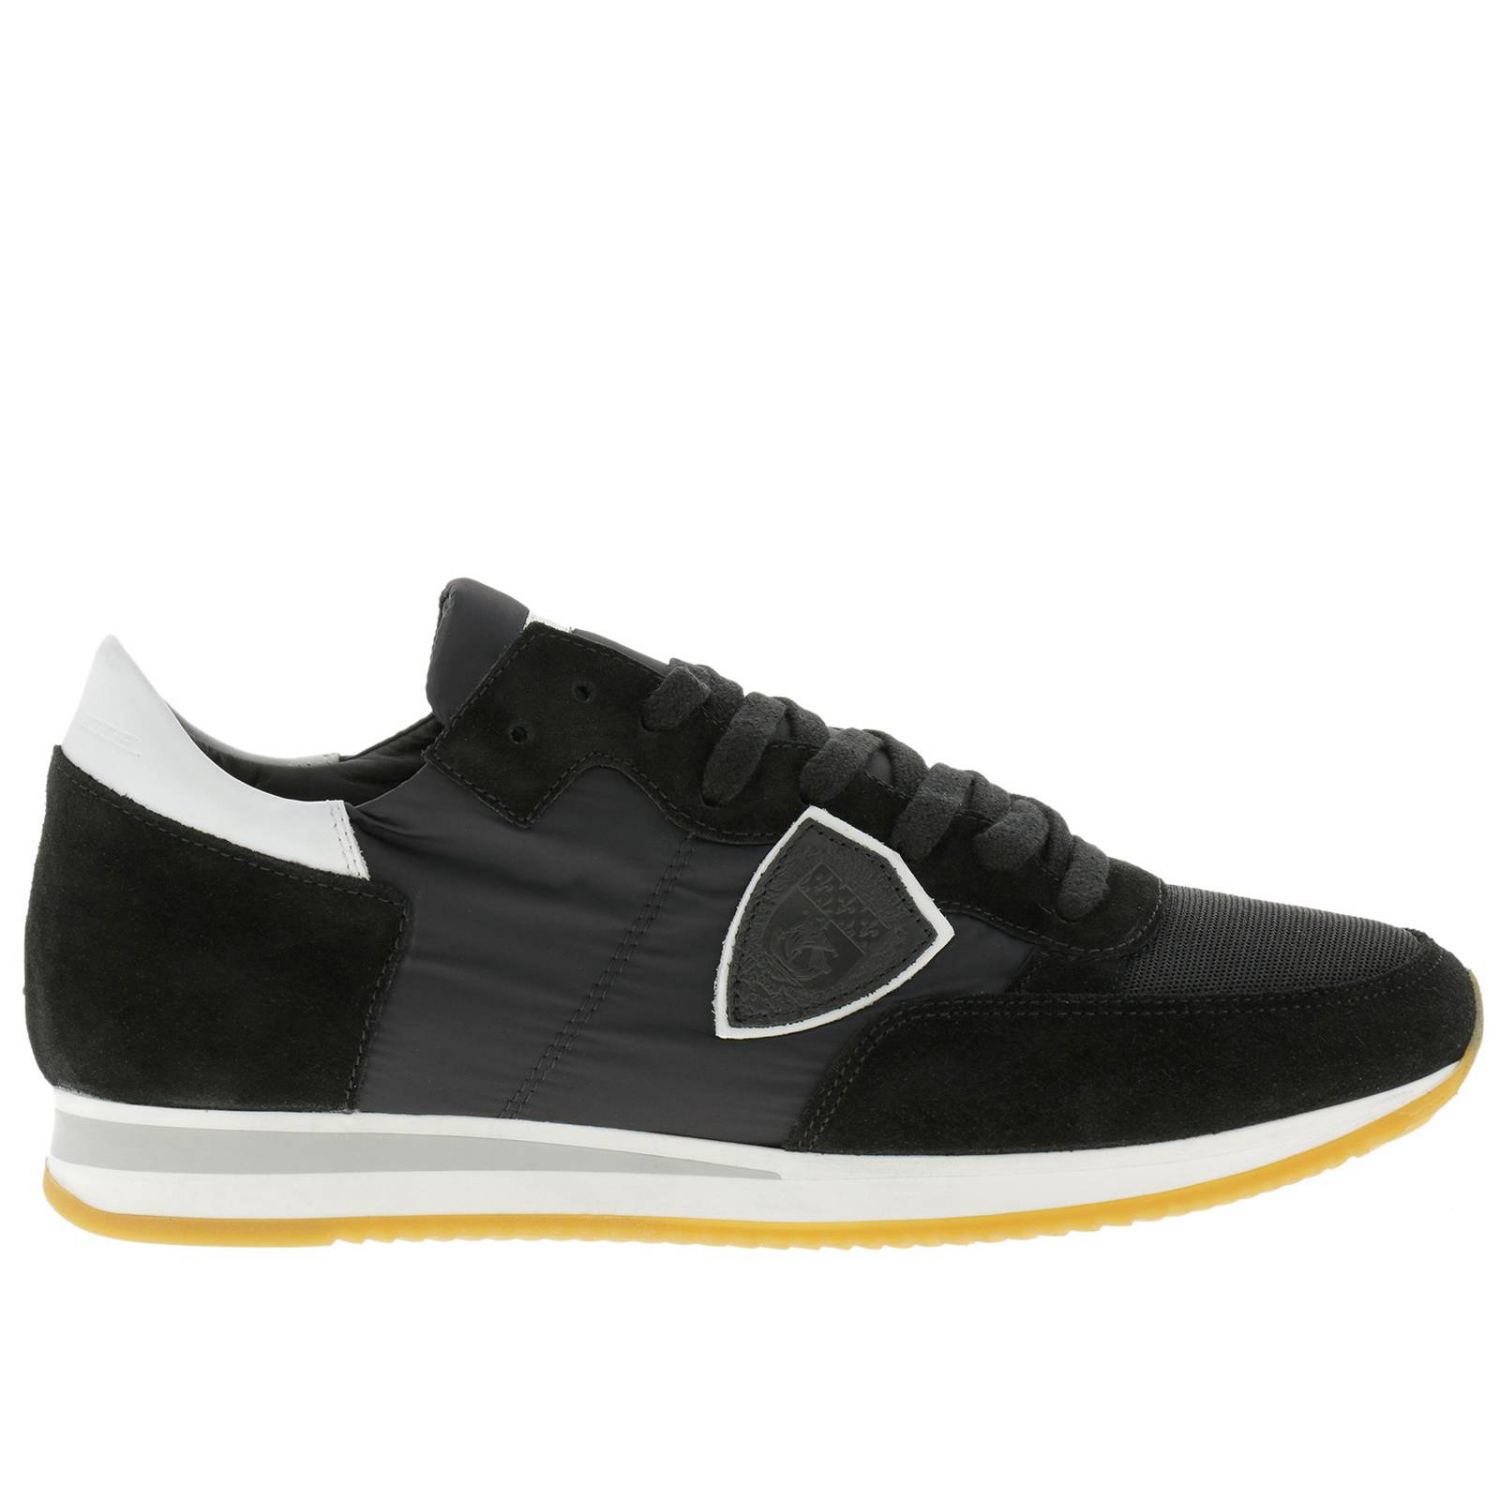 Philippe Model Outlet: sneakers for man - Black | Philippe Model ...